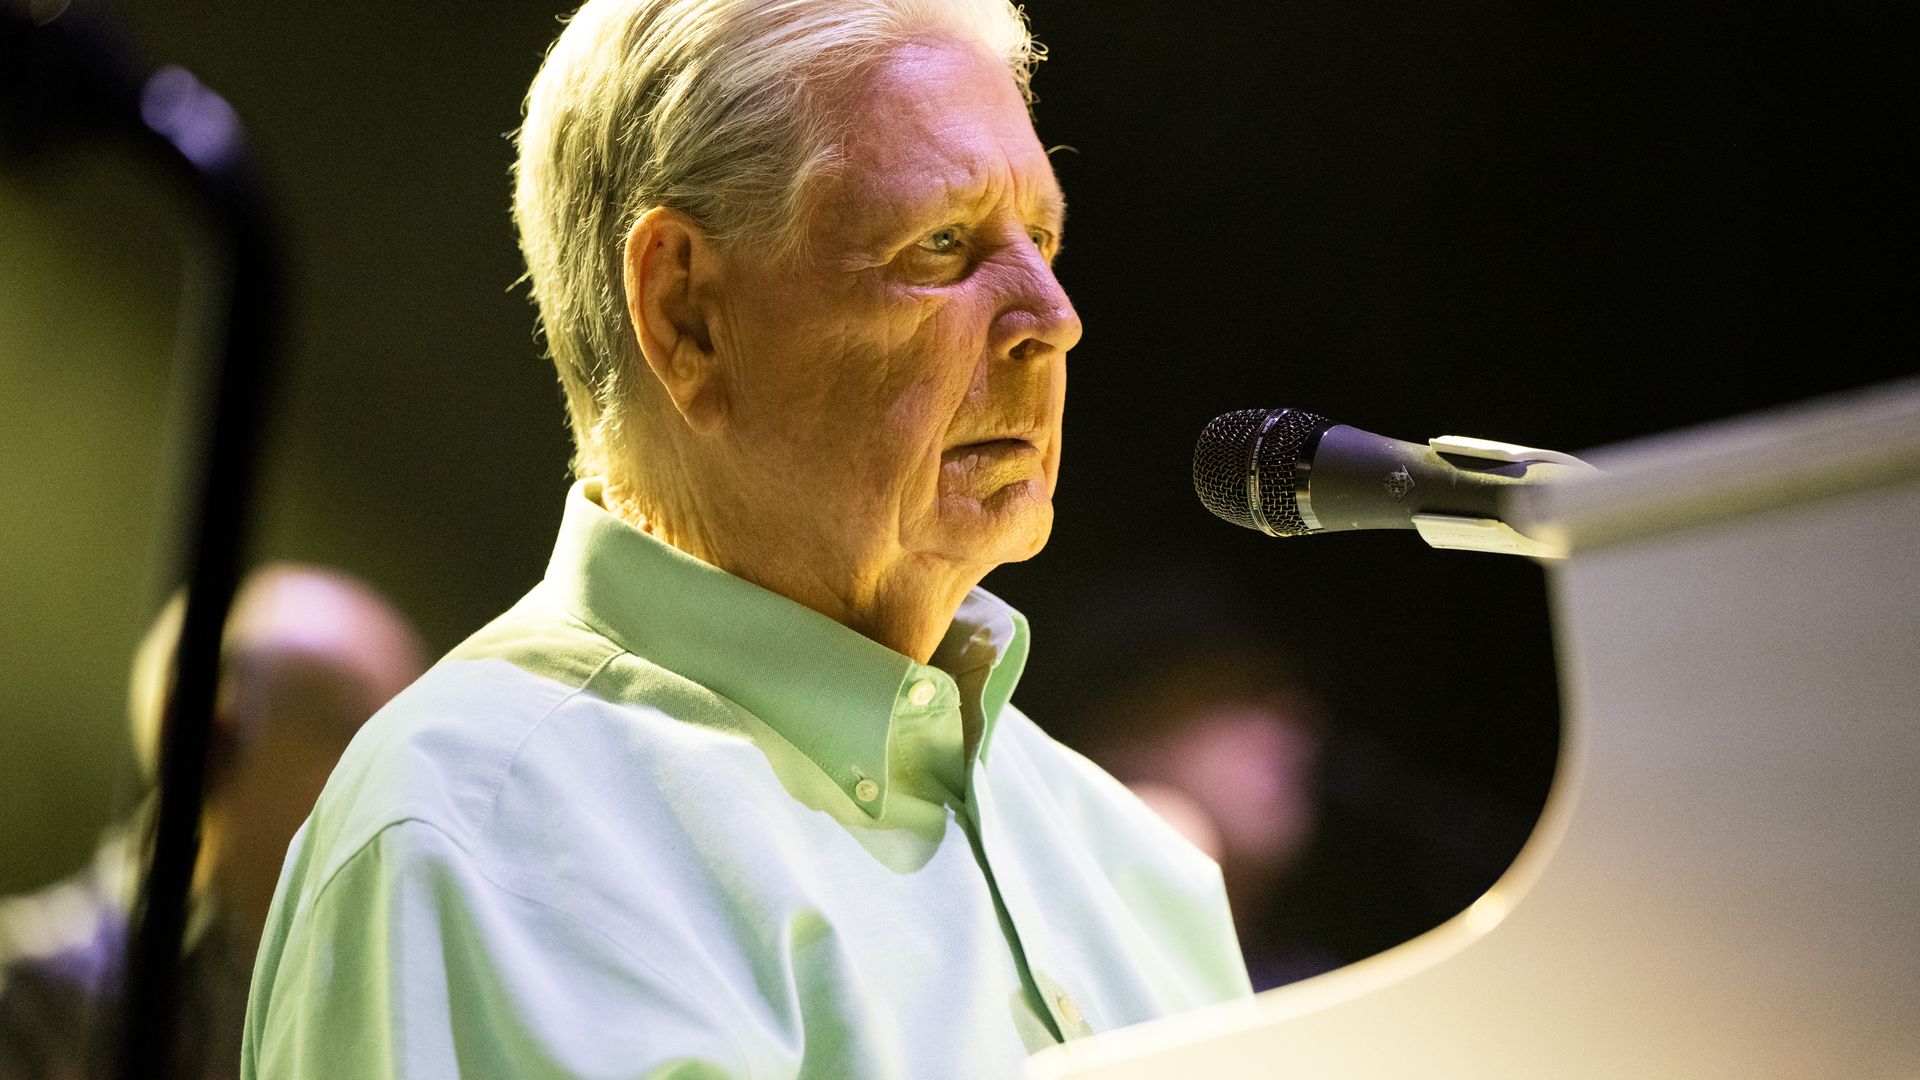 Beach Boys' Brian Wilson, 81, 'suffering from dementia' weeks after the singer's wife Melinda died